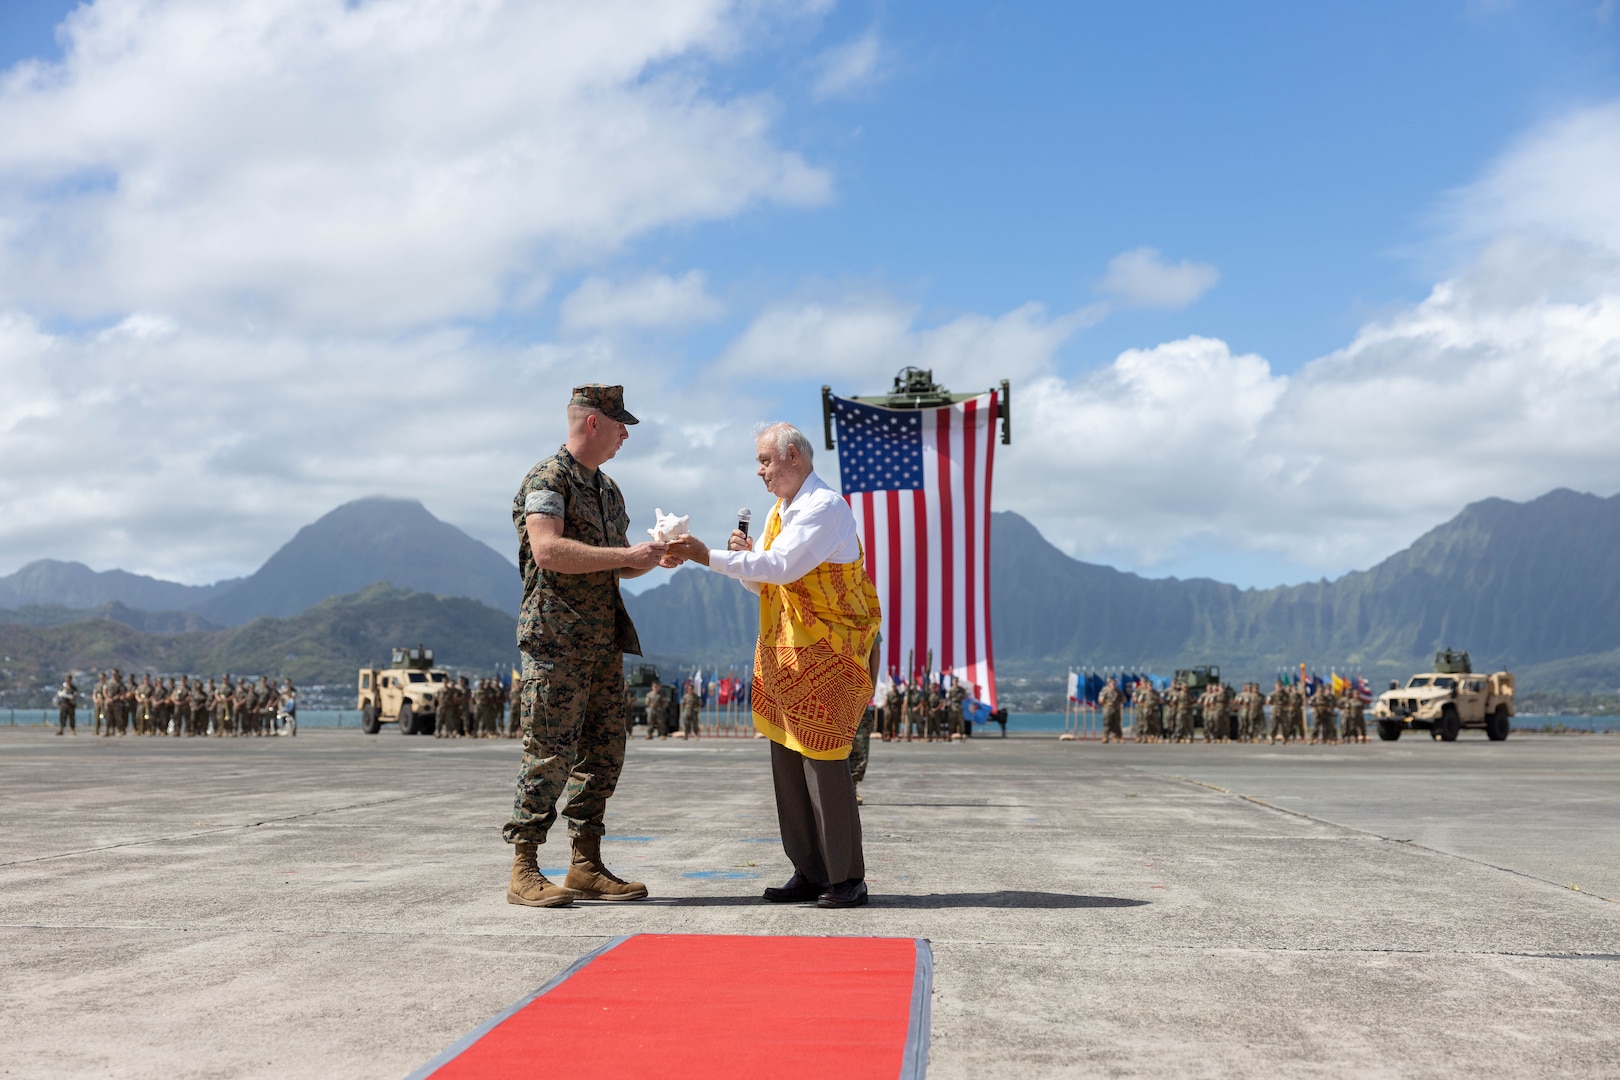 U.S. Marine Corps Lt. Col. Heath Phillips, commanding officer, 1st Low Altitude Air Defense (LAAD) Battalion, Marine Air Control Group 18, 1st Marine Aircraft Wing, receives a gift during a reactivation and designation ceremony at Marine Corps Air Station Kaneohe Bay, Hawaii, Aug. 31, 2023. Originally activated in July 1982 in Okinawa, Japan, the unit underwent two redesignations before folding its’ colors in Sept. 2007. The reactivation of 1st LAAD Battalion demonstrates forward progression toward force modernization in the INDOPACIFIC region. The primary mission of 1st LAAD Battalion is to deliver close-in, low-altitude, surface-to-air weapon capabilities. (U.S. Marine Corps photo by Lance Cpl. Clayton Baker)